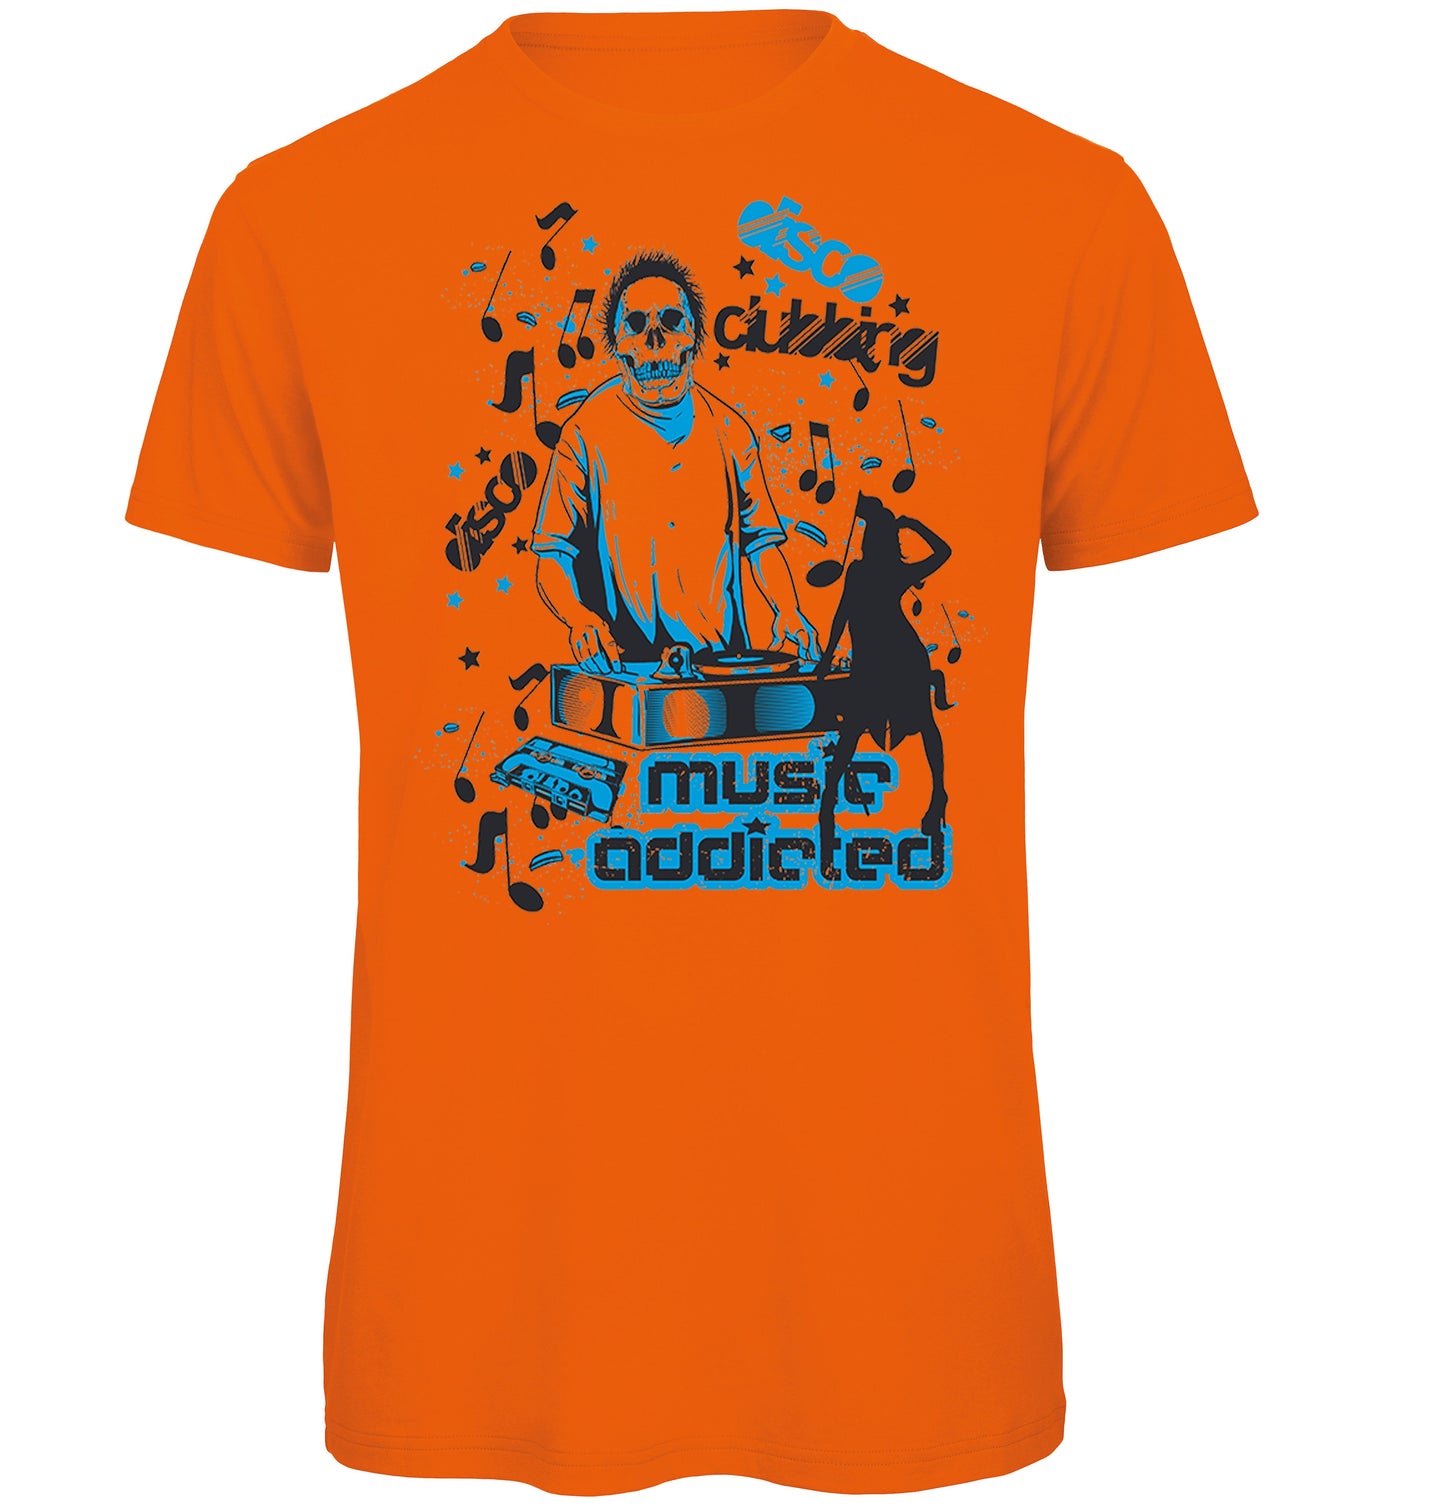 Addicted to Music Retro T-Shirt - Scattee